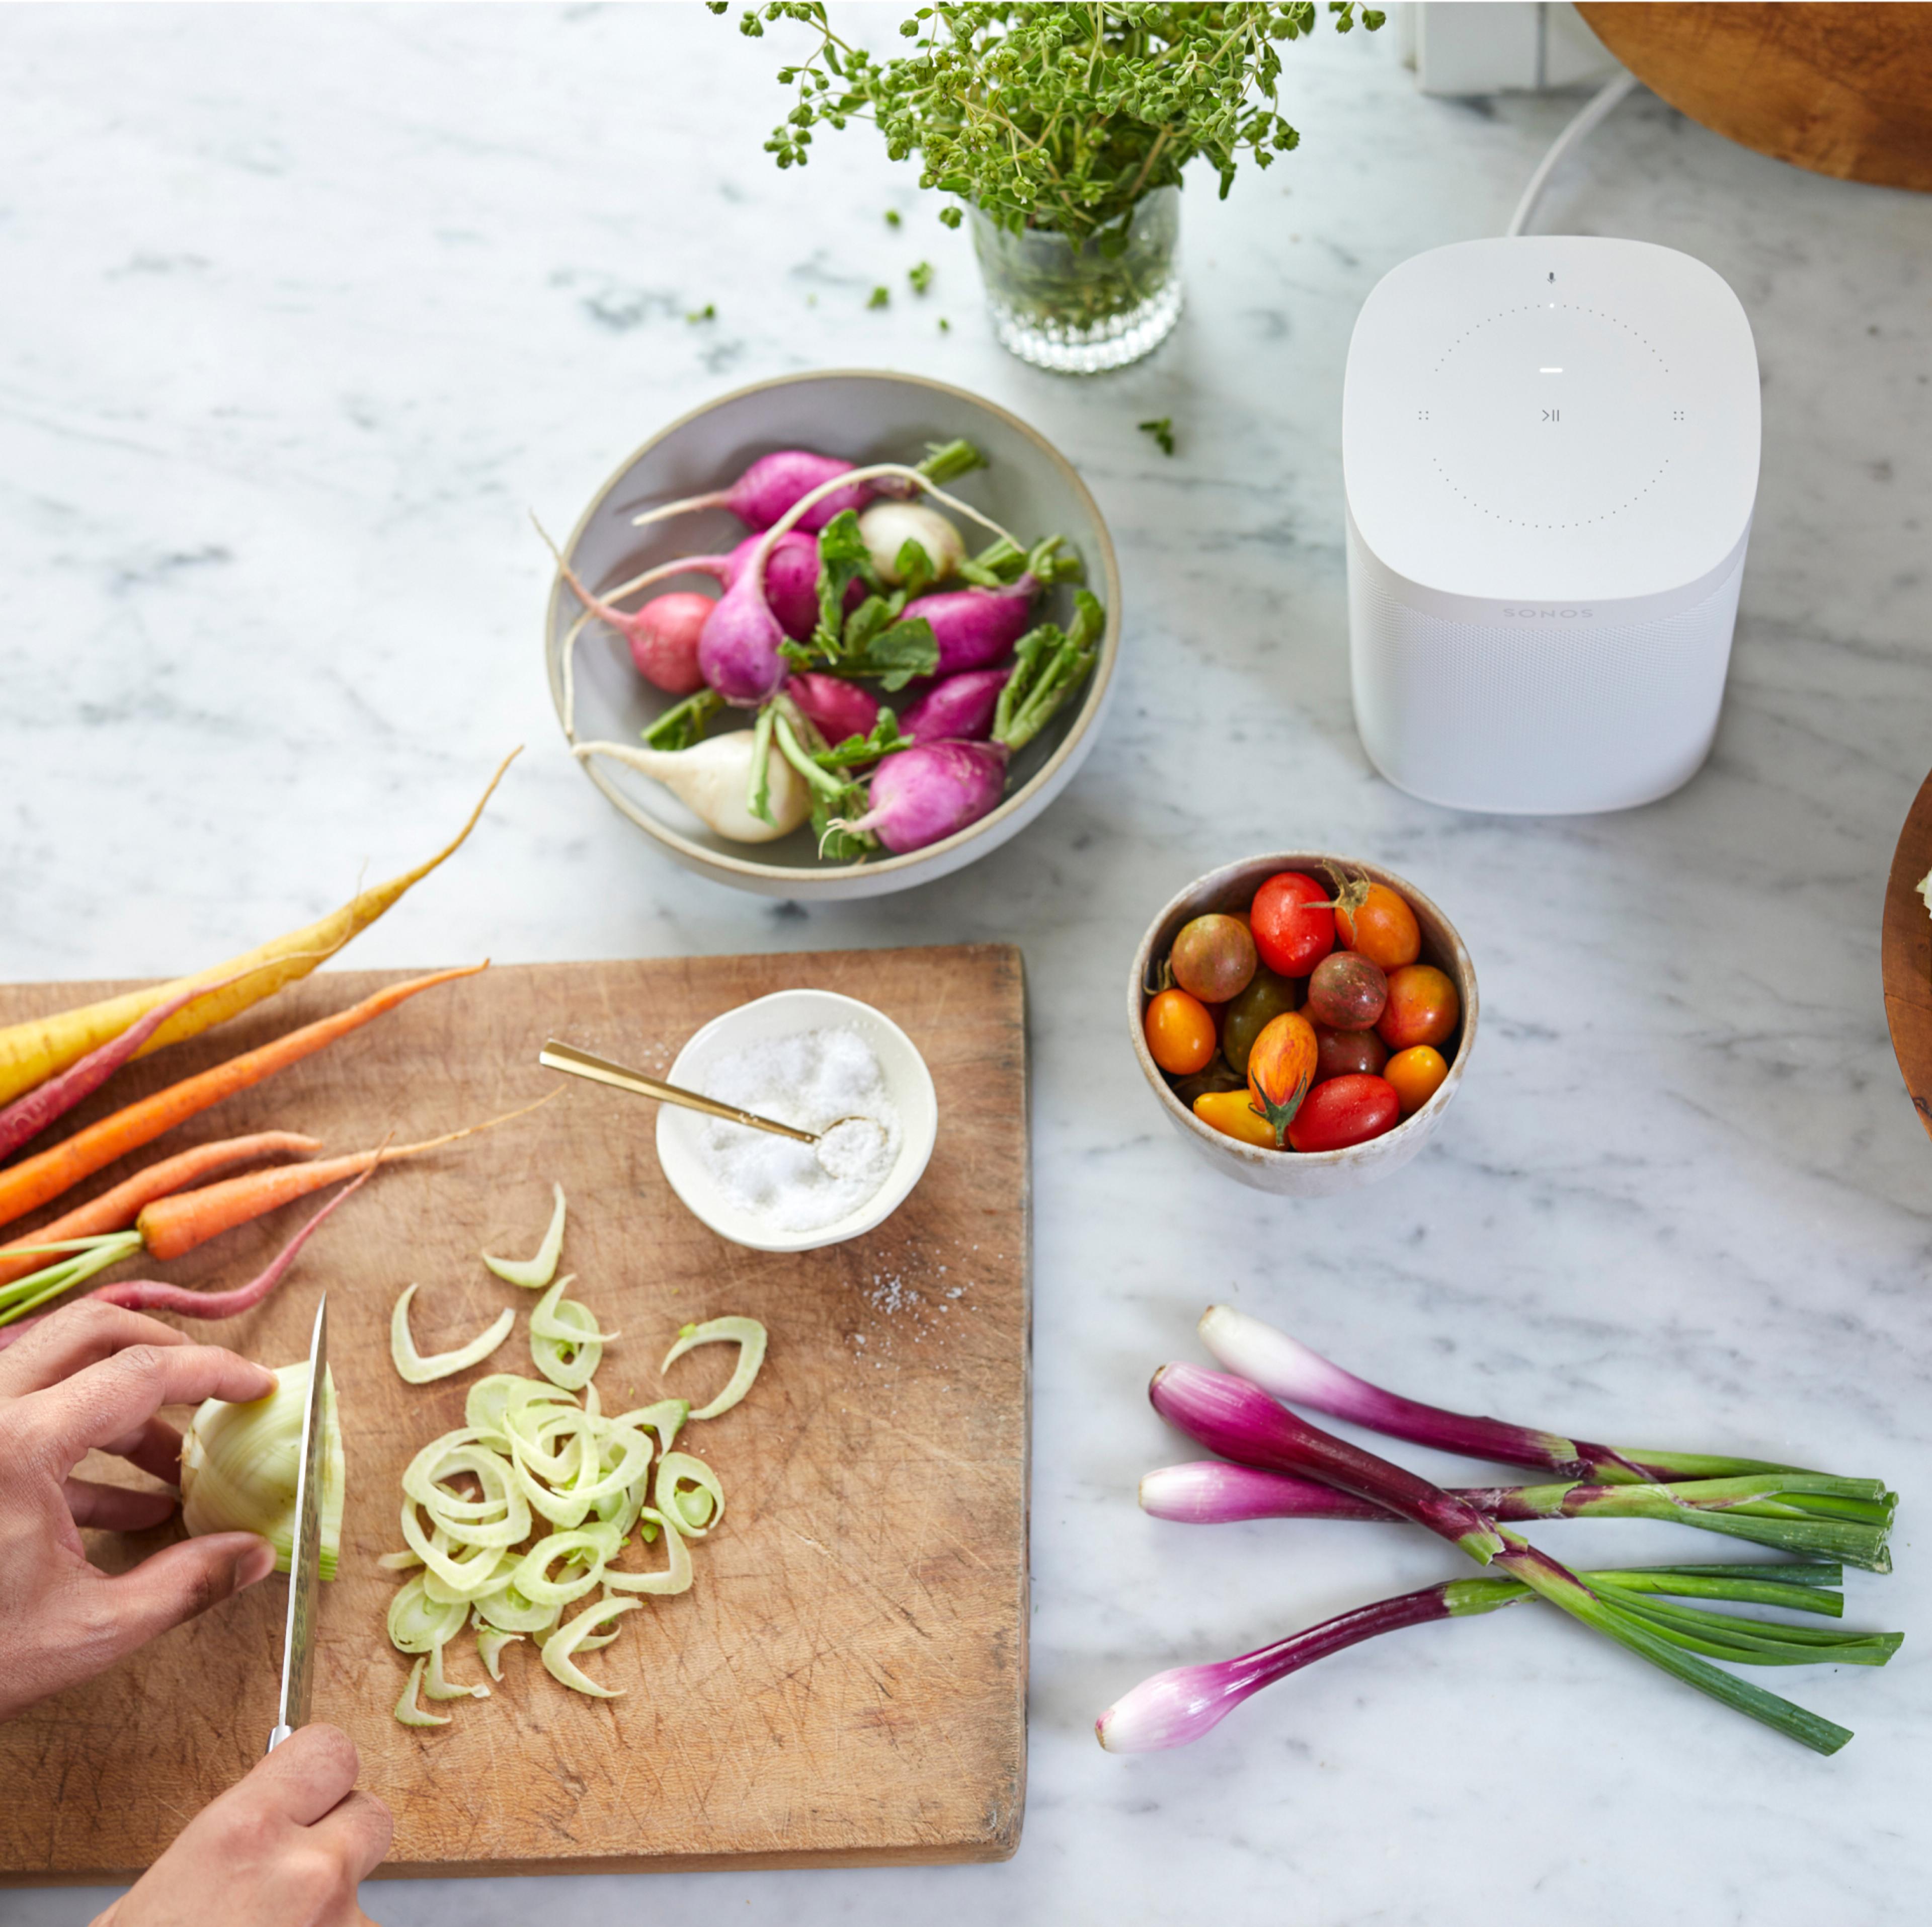 Sonos White with vegetables and cutting board